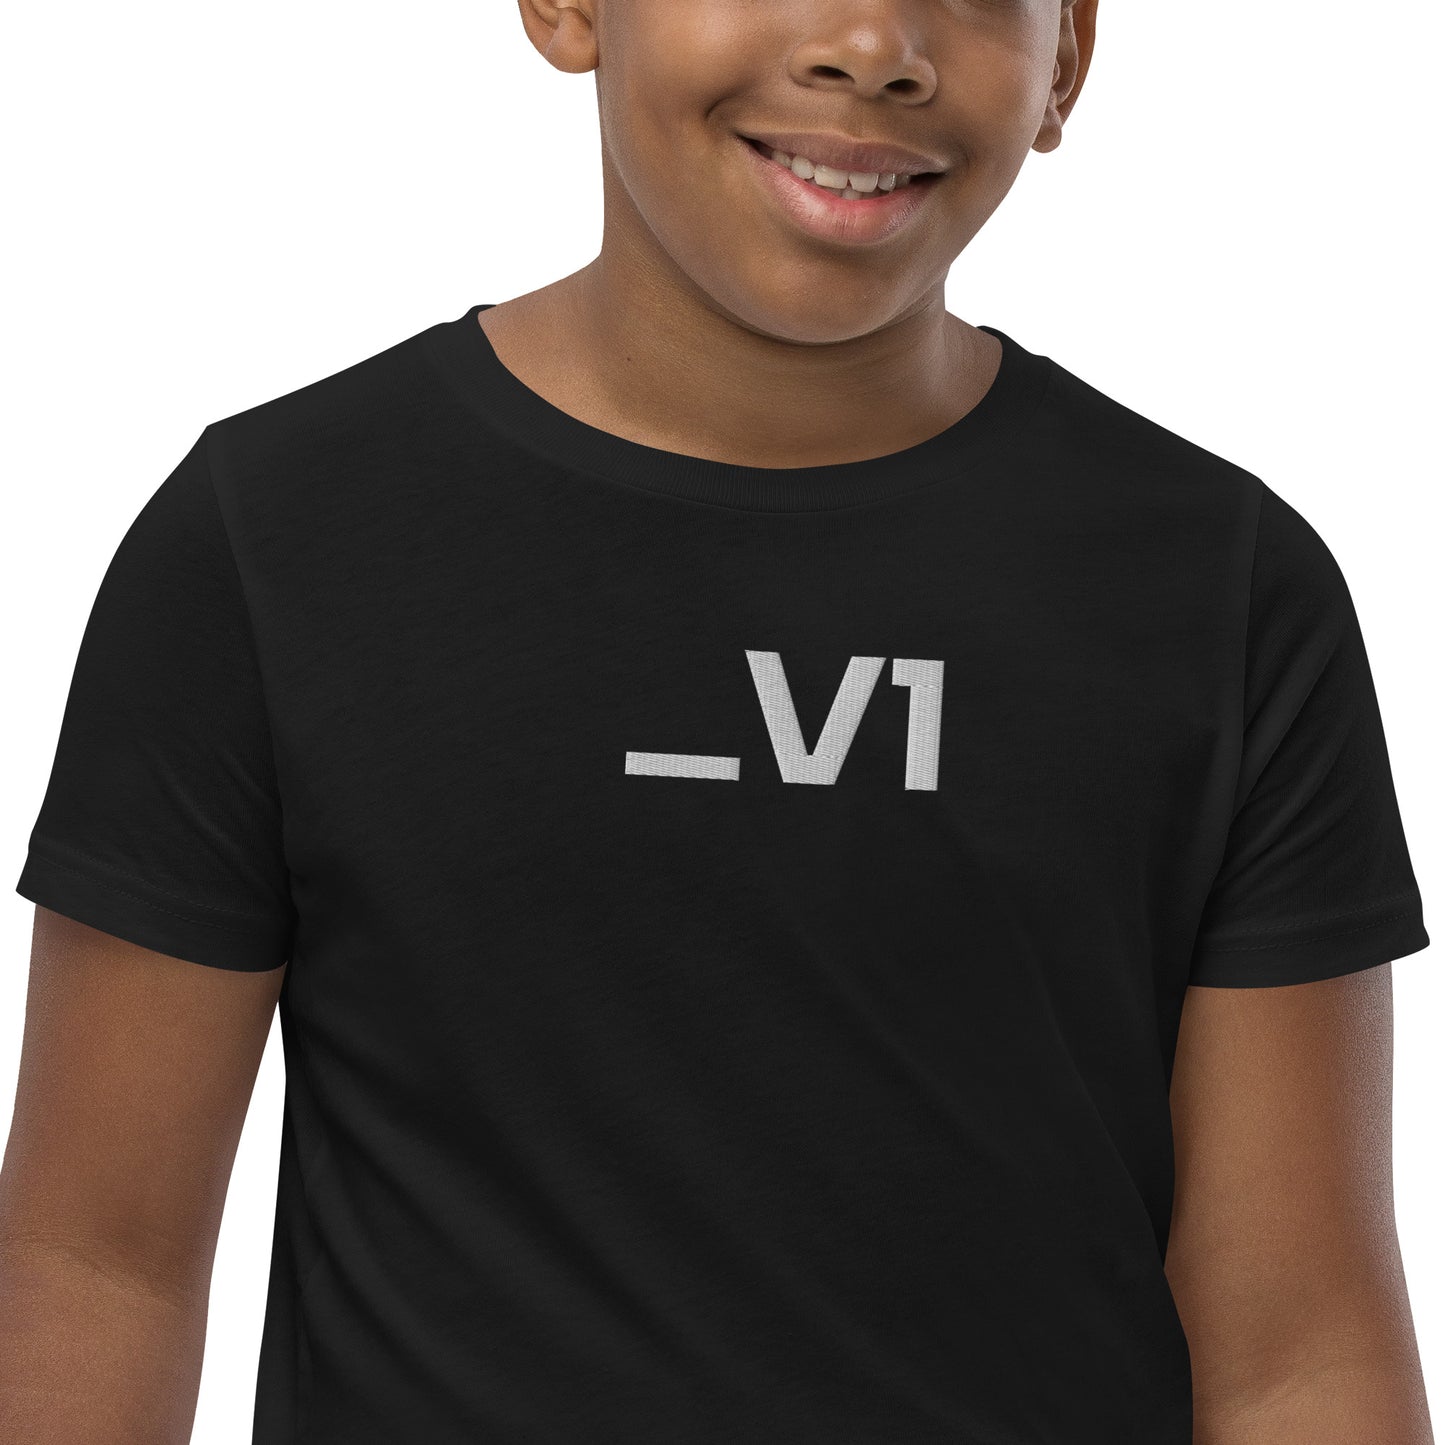 _V1 Embroidered Youth Short Sleeve T-Shirt